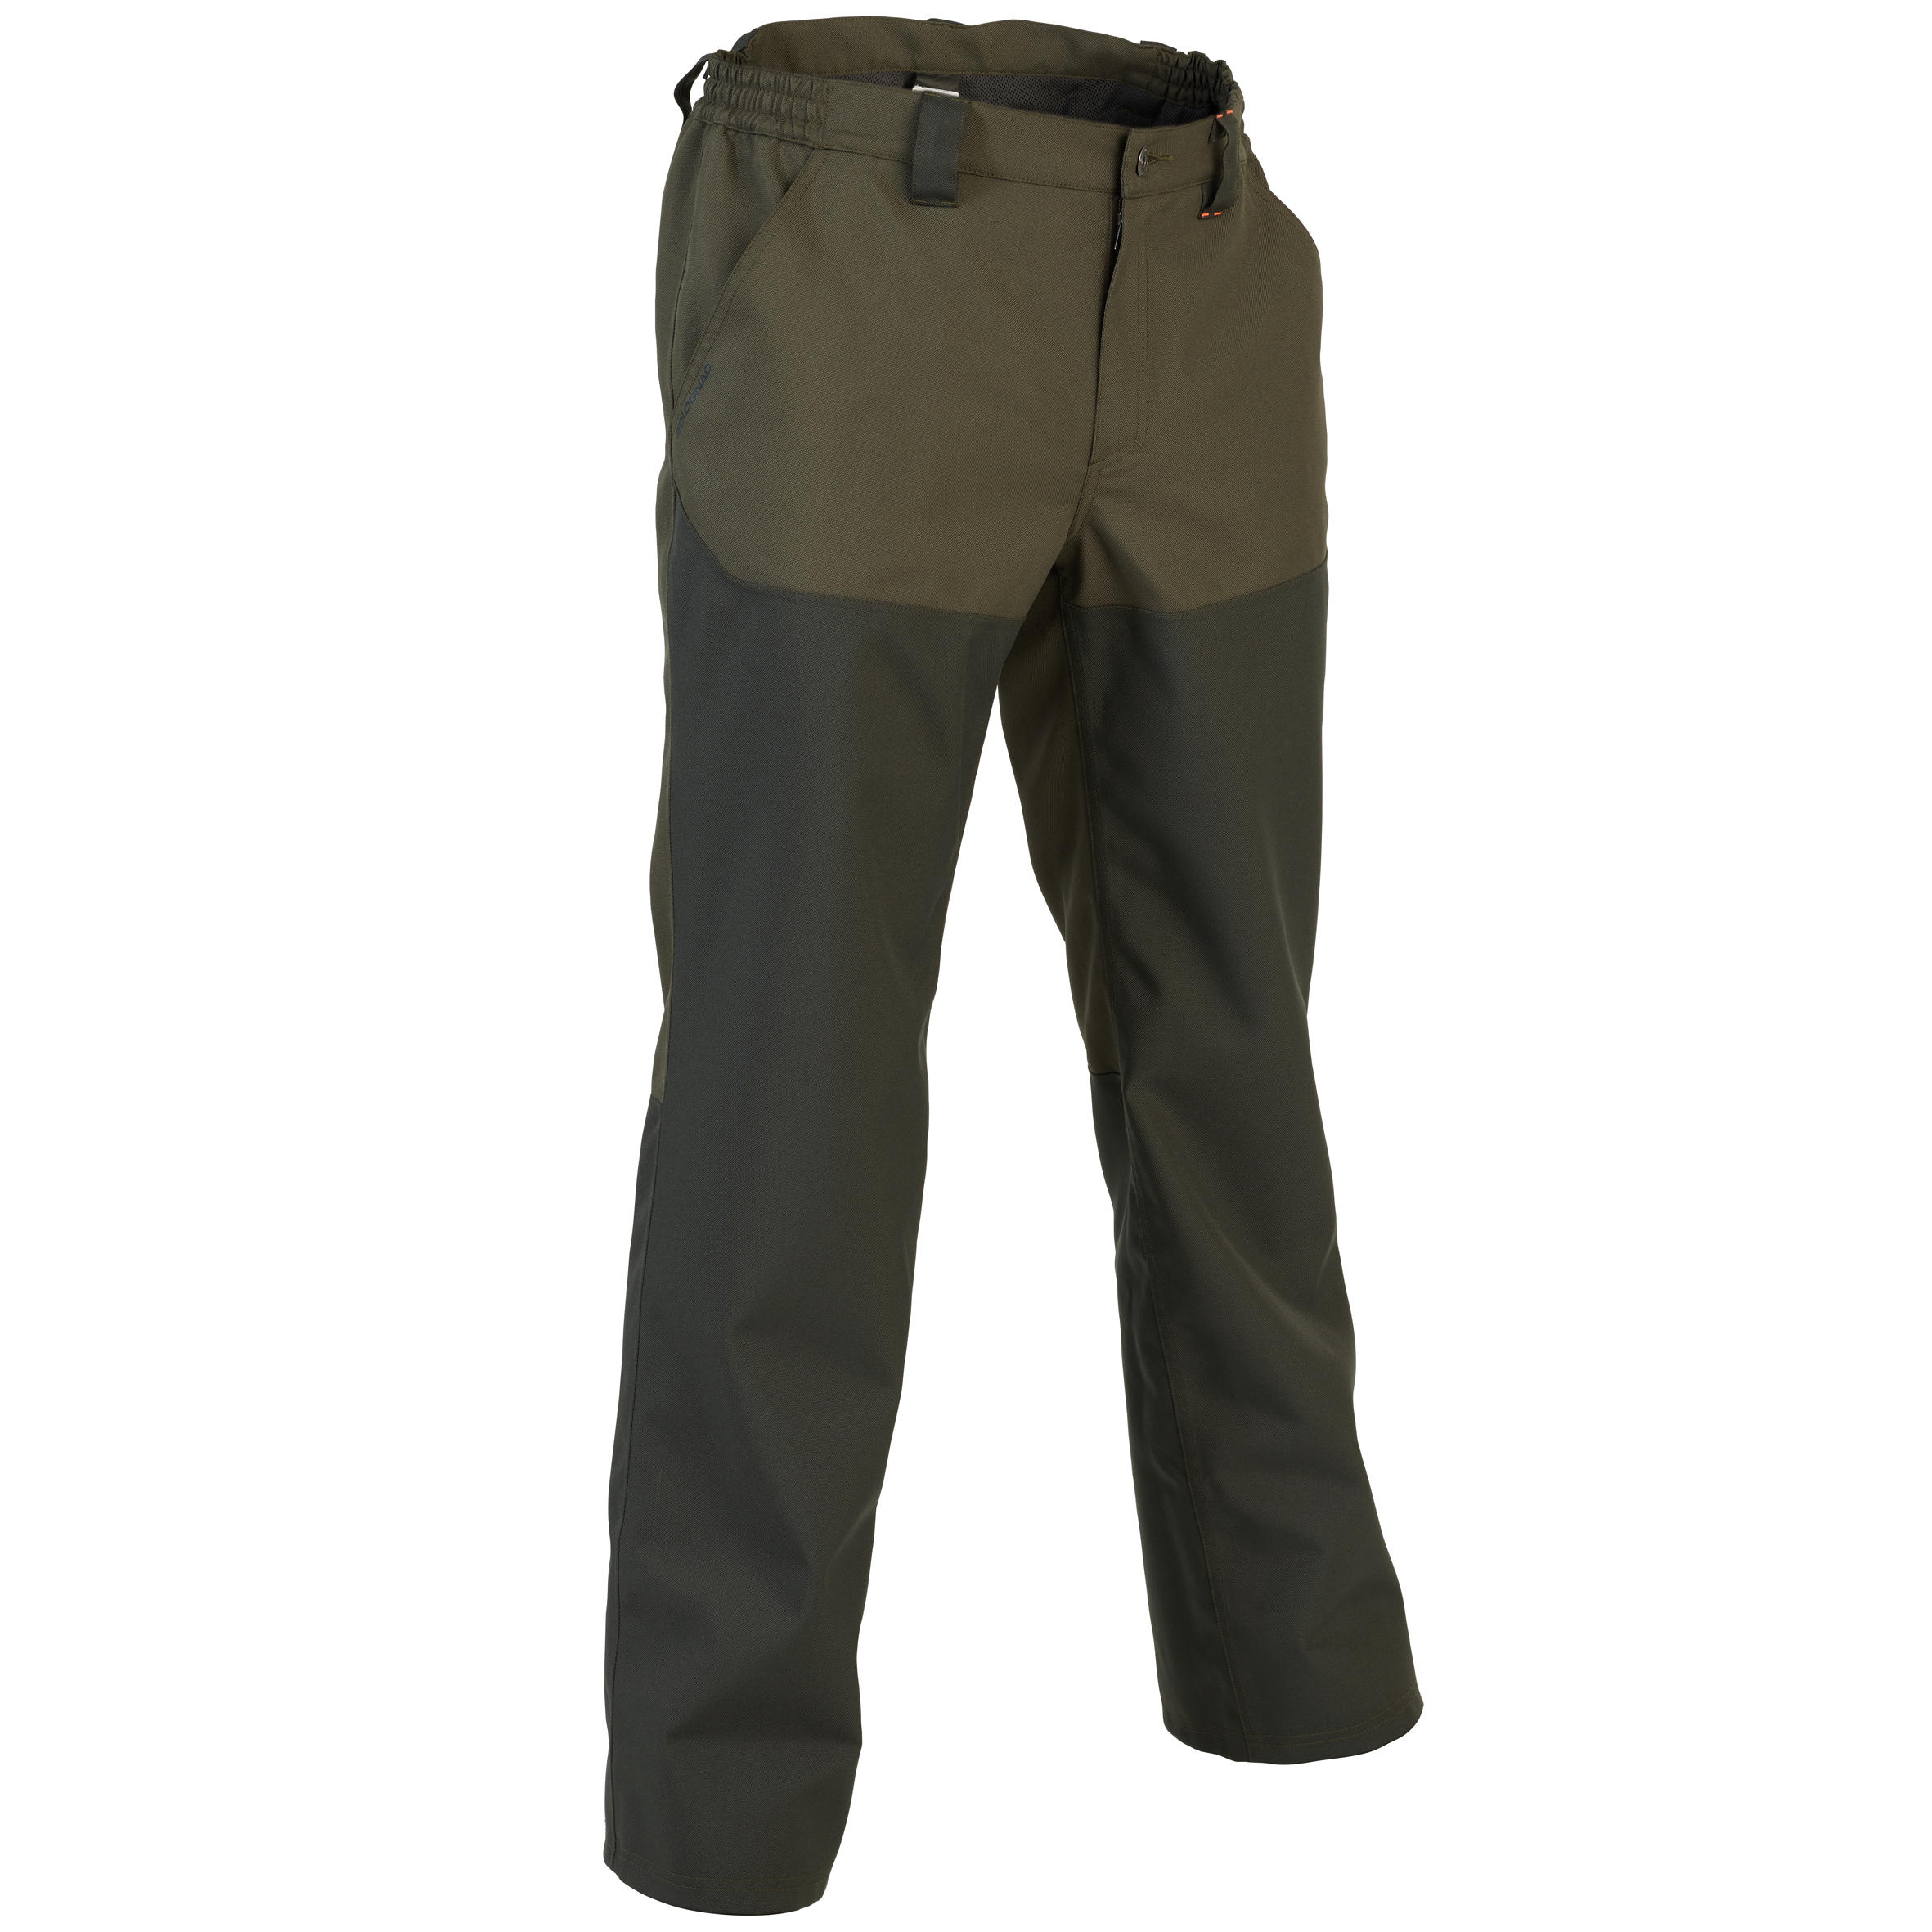 Lightweight Waterproof Trousers products for sale  eBay